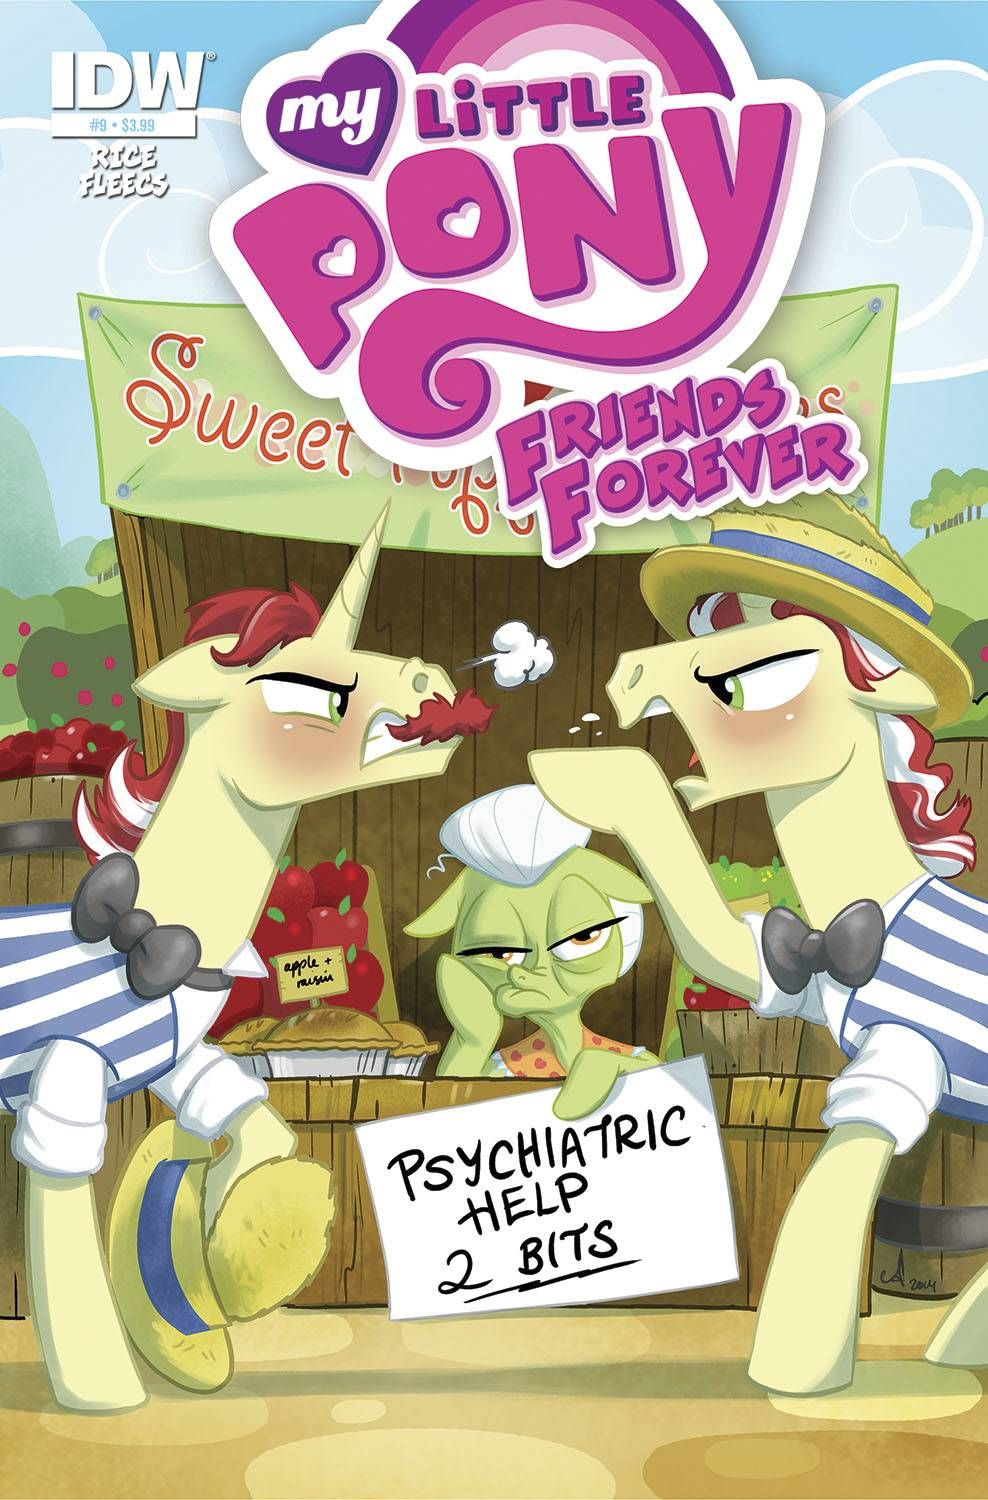 My Little Pony Friends Forever #9 Comic